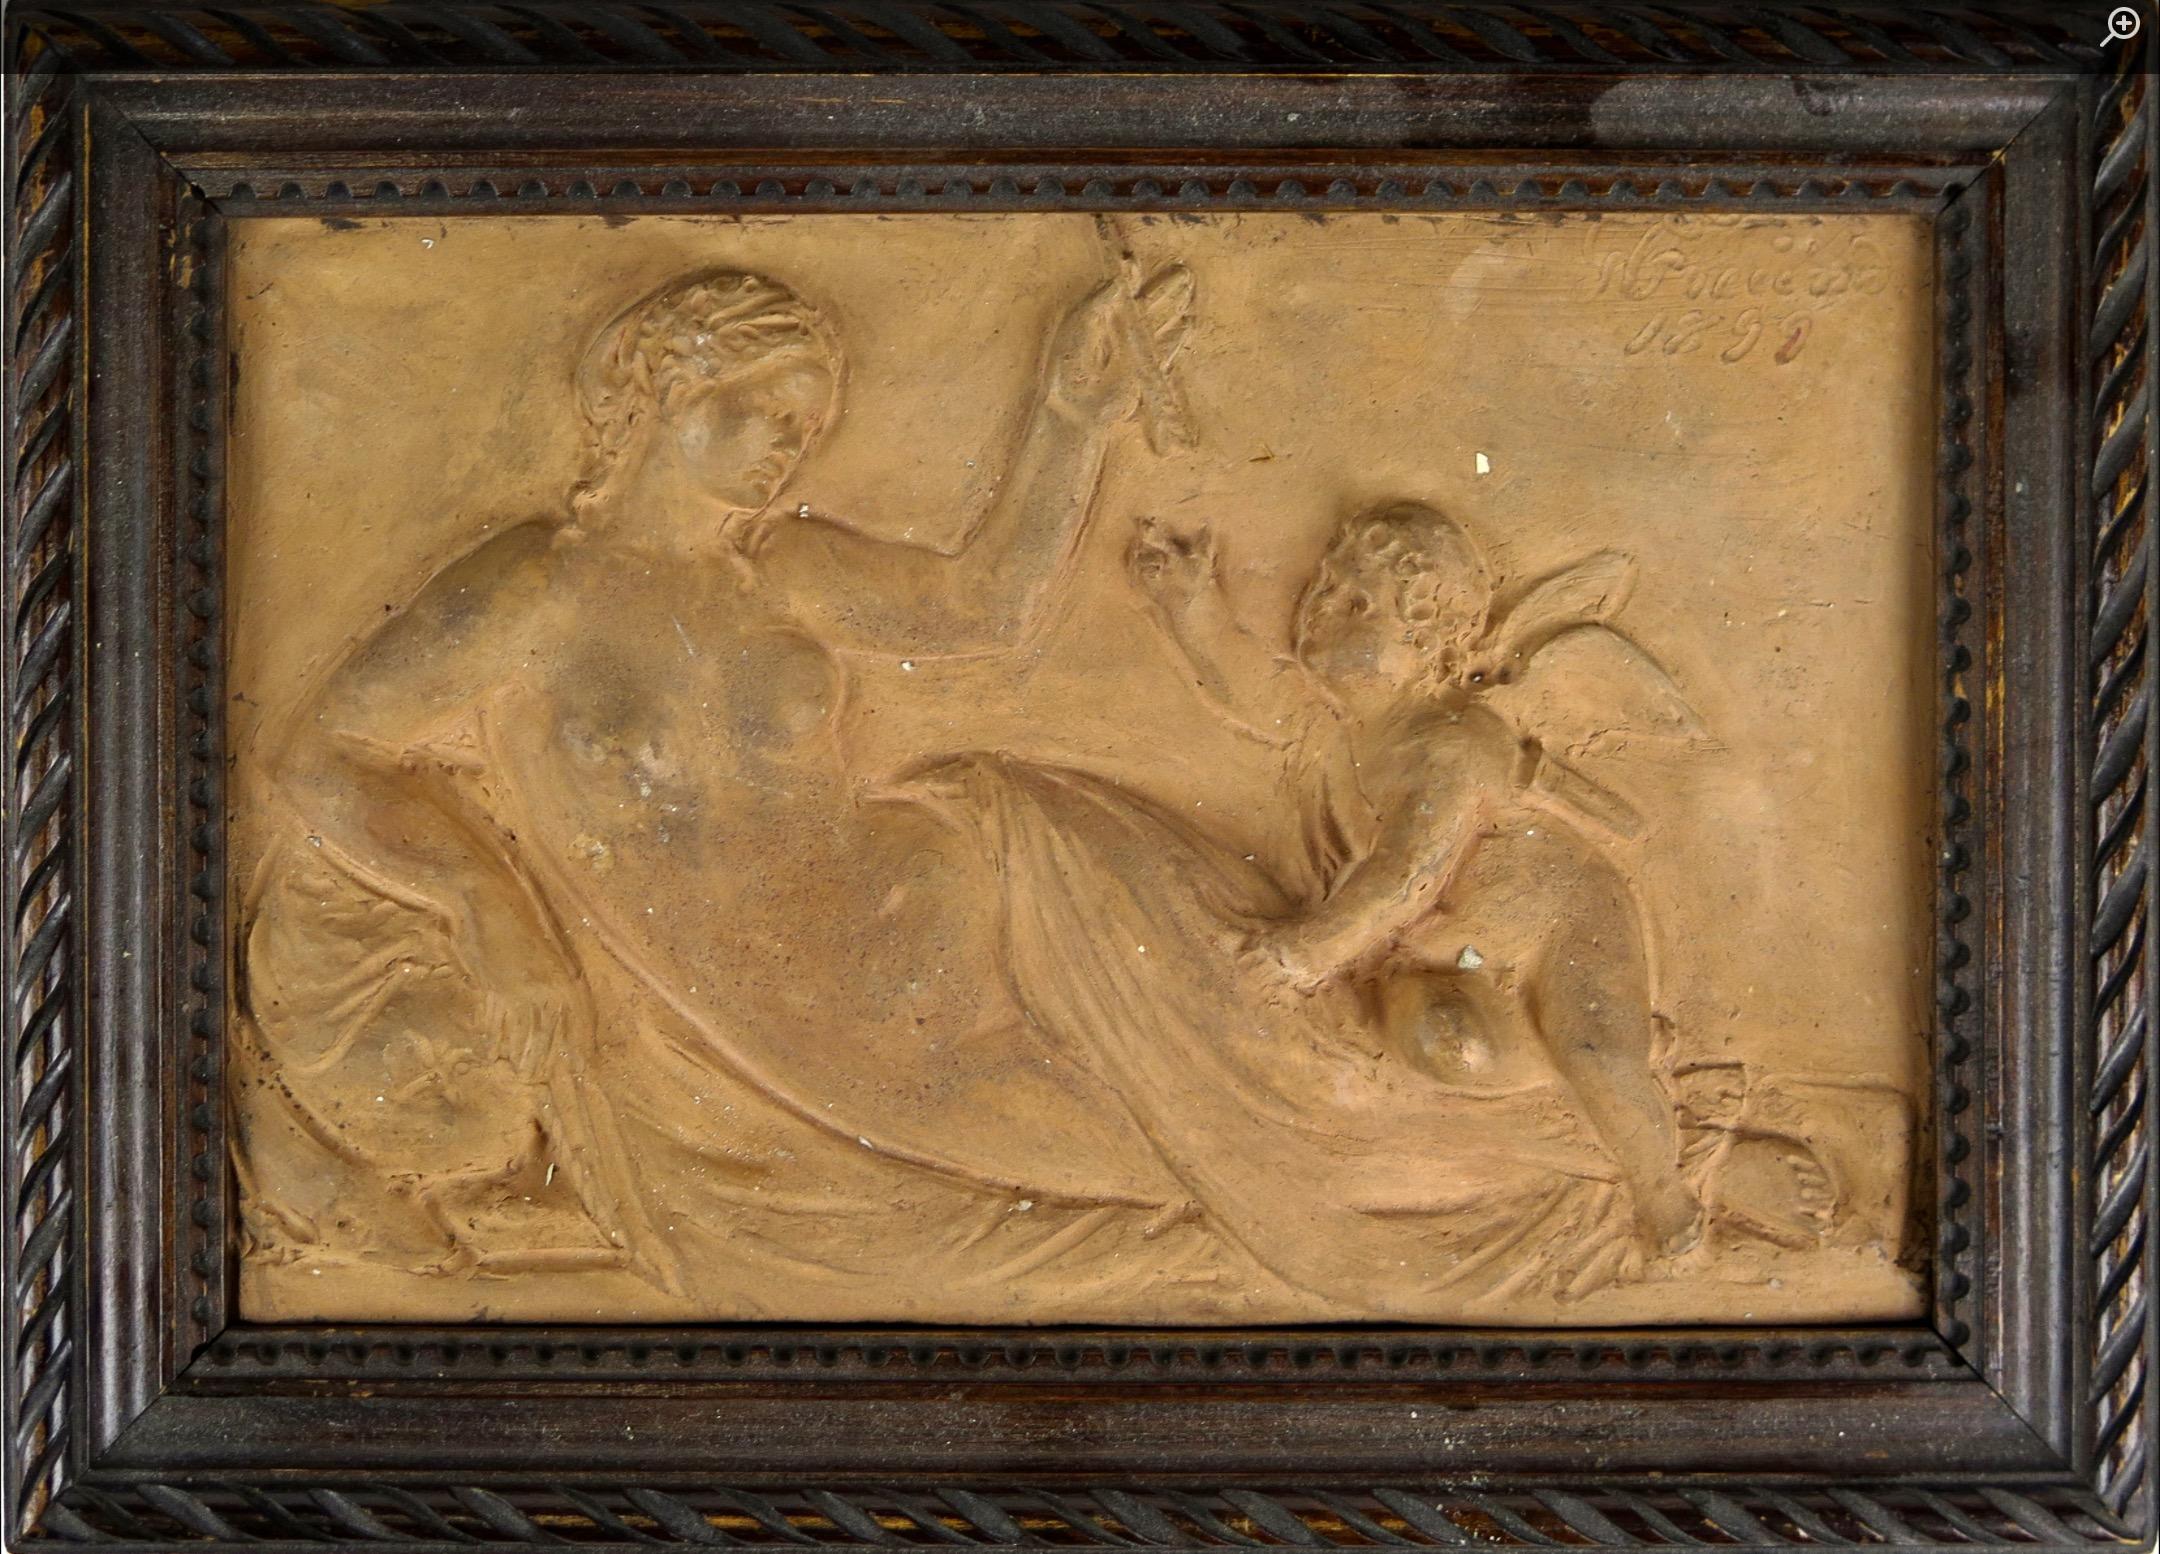 A fine terracotta relief of Venus and Cupid by Georg Christian Freund, (1821 - 1900), a Danish sculptor.  Signed and dated 1899. Mounted in the original hand carved frame, possibly made by Freund. 
A terracotta relief of Eumaios and Odysseus signed